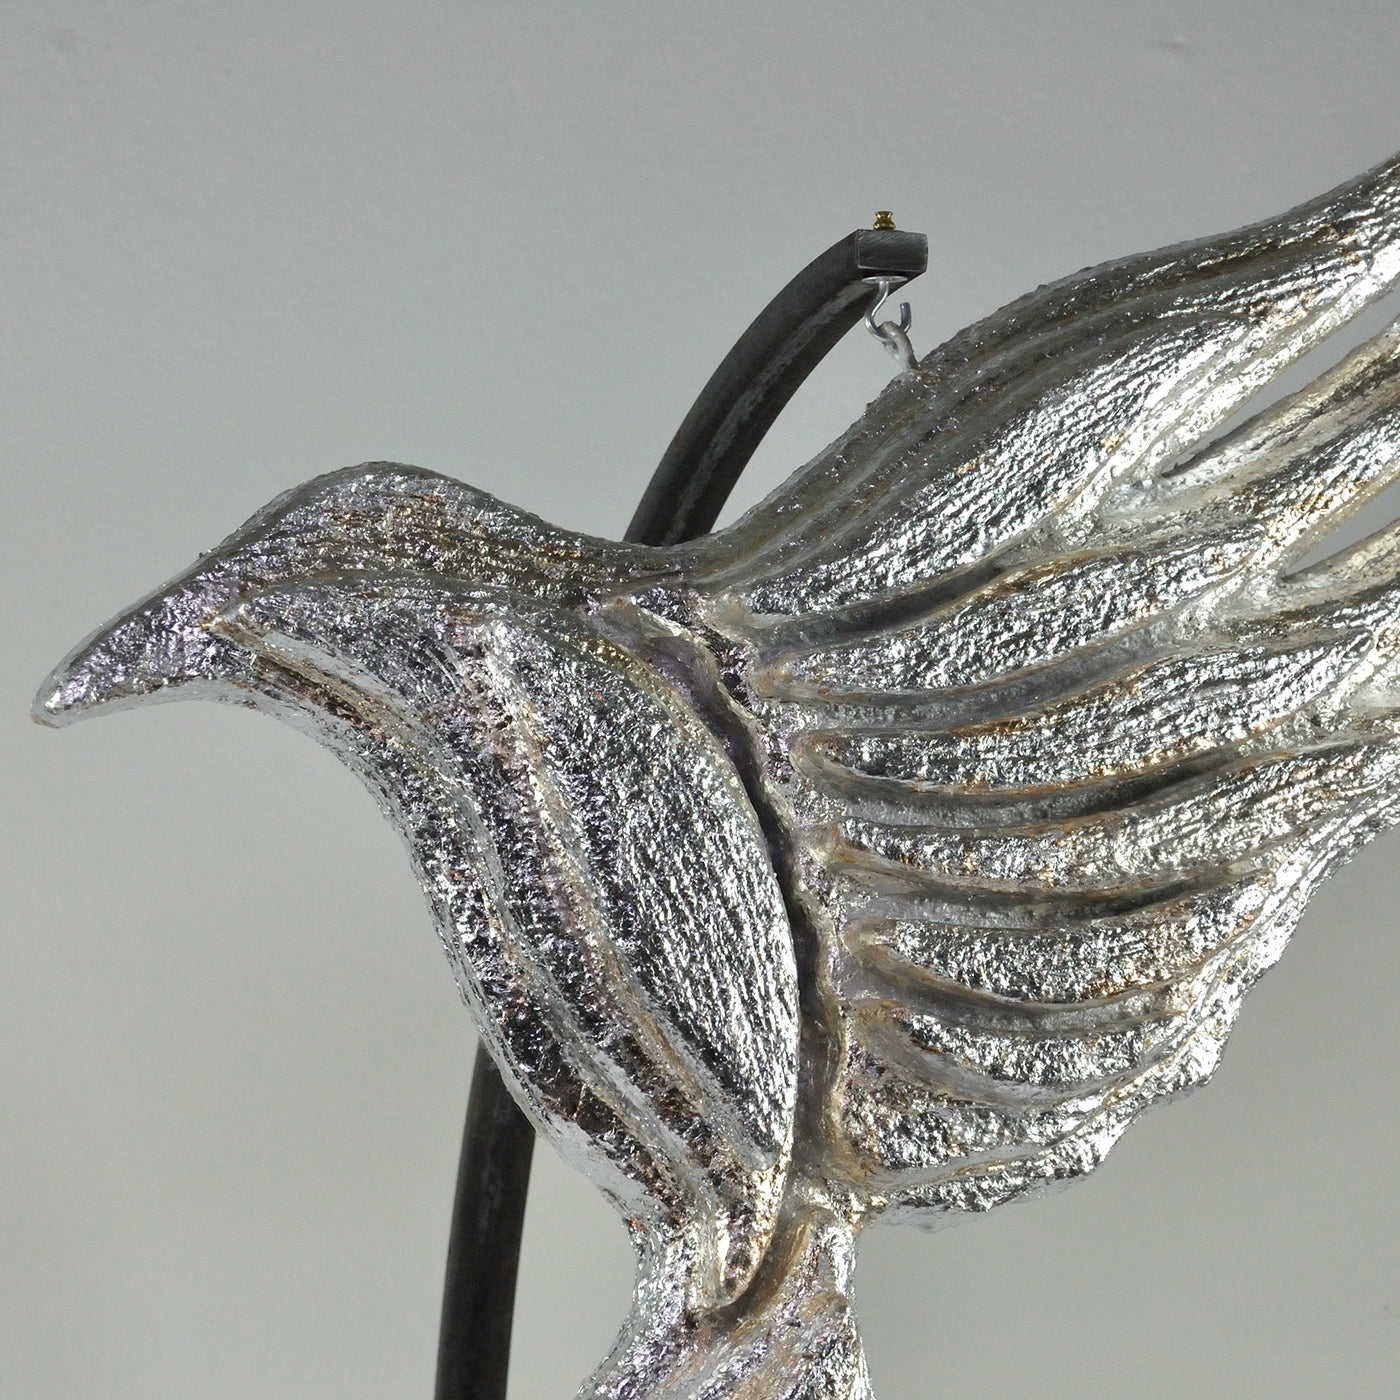 Fly Away Silvery Sculpture - Alternative view 3